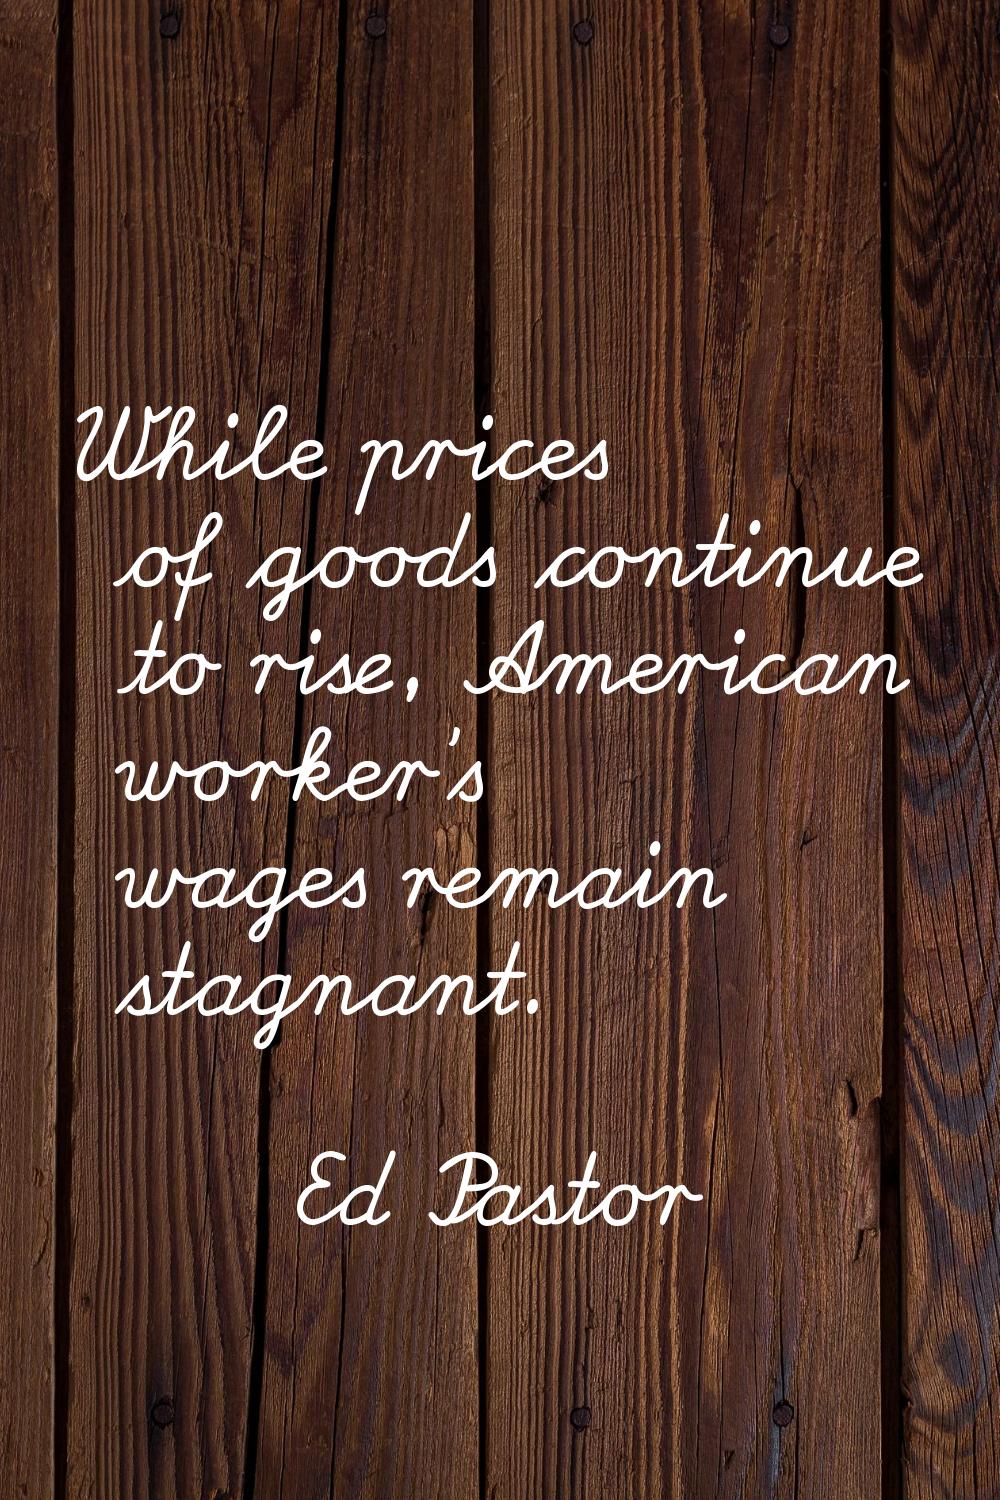 While prices of goods continue to rise, American worker's wages remain stagnant.